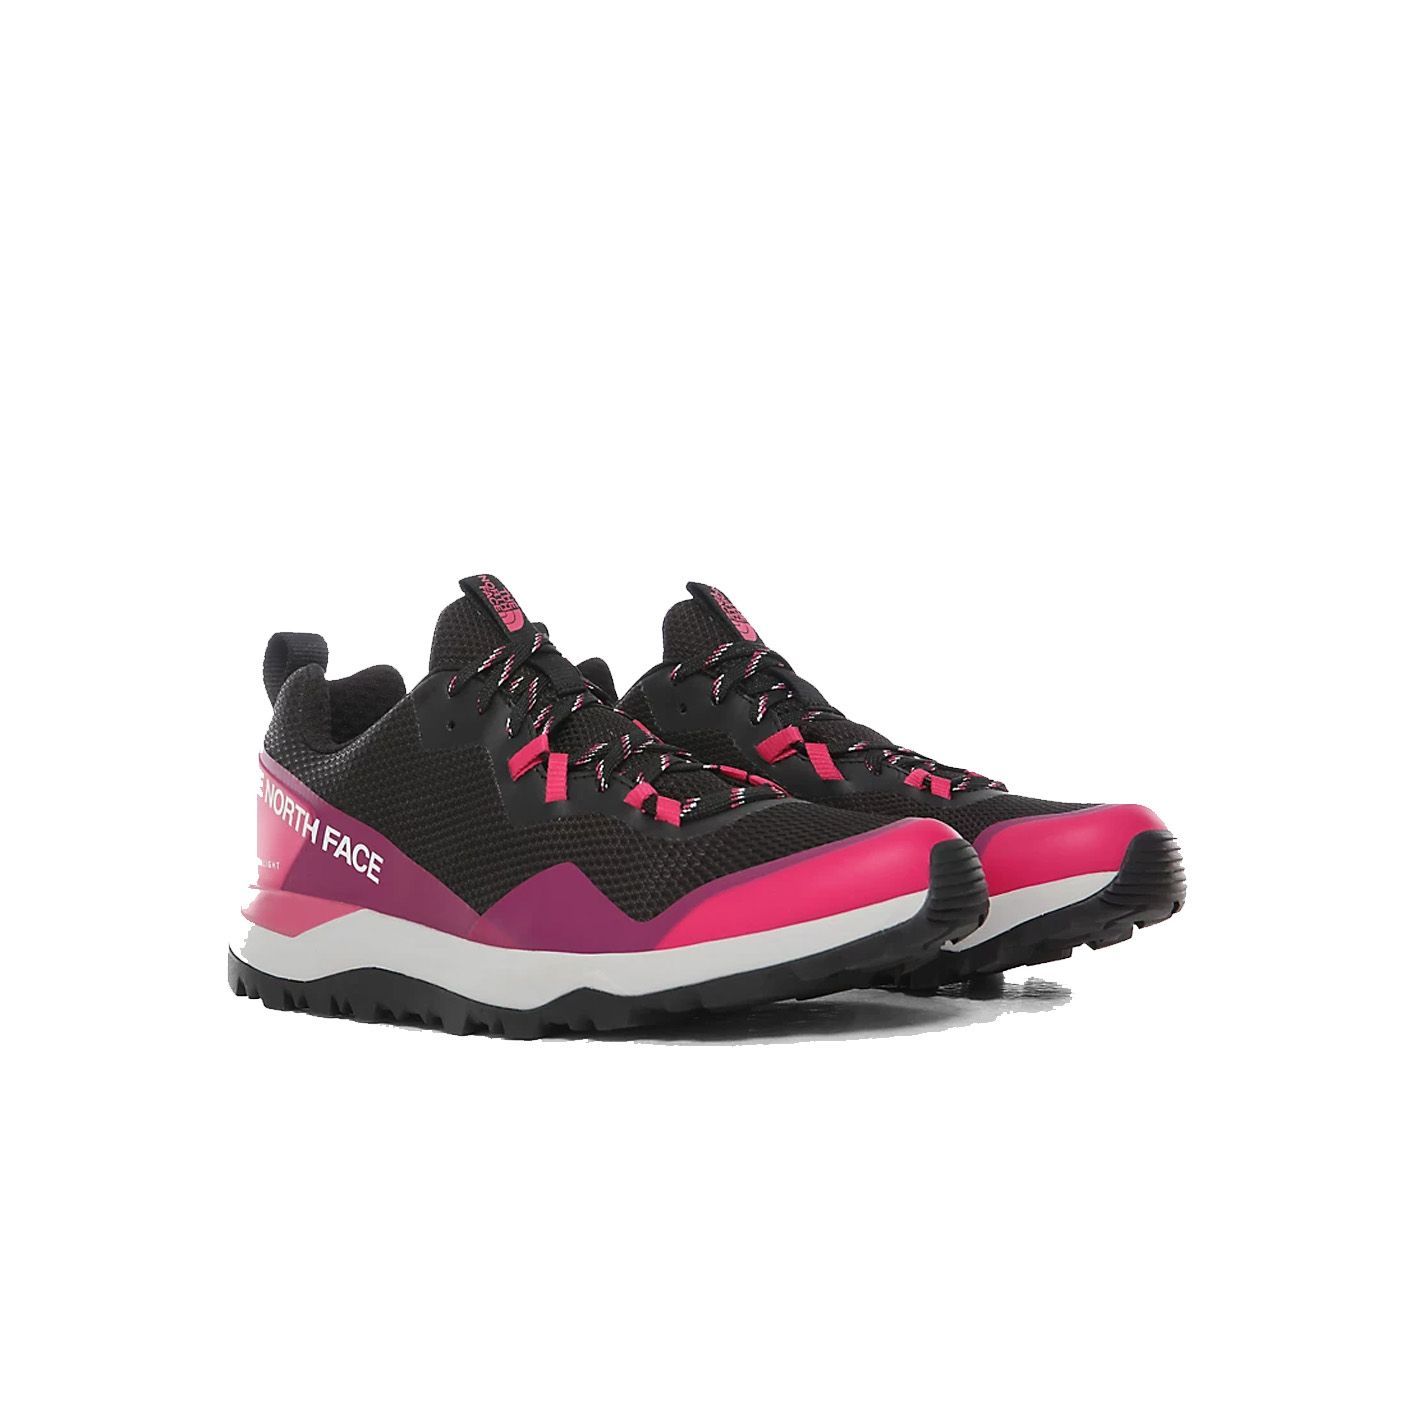 the north face womens trainers